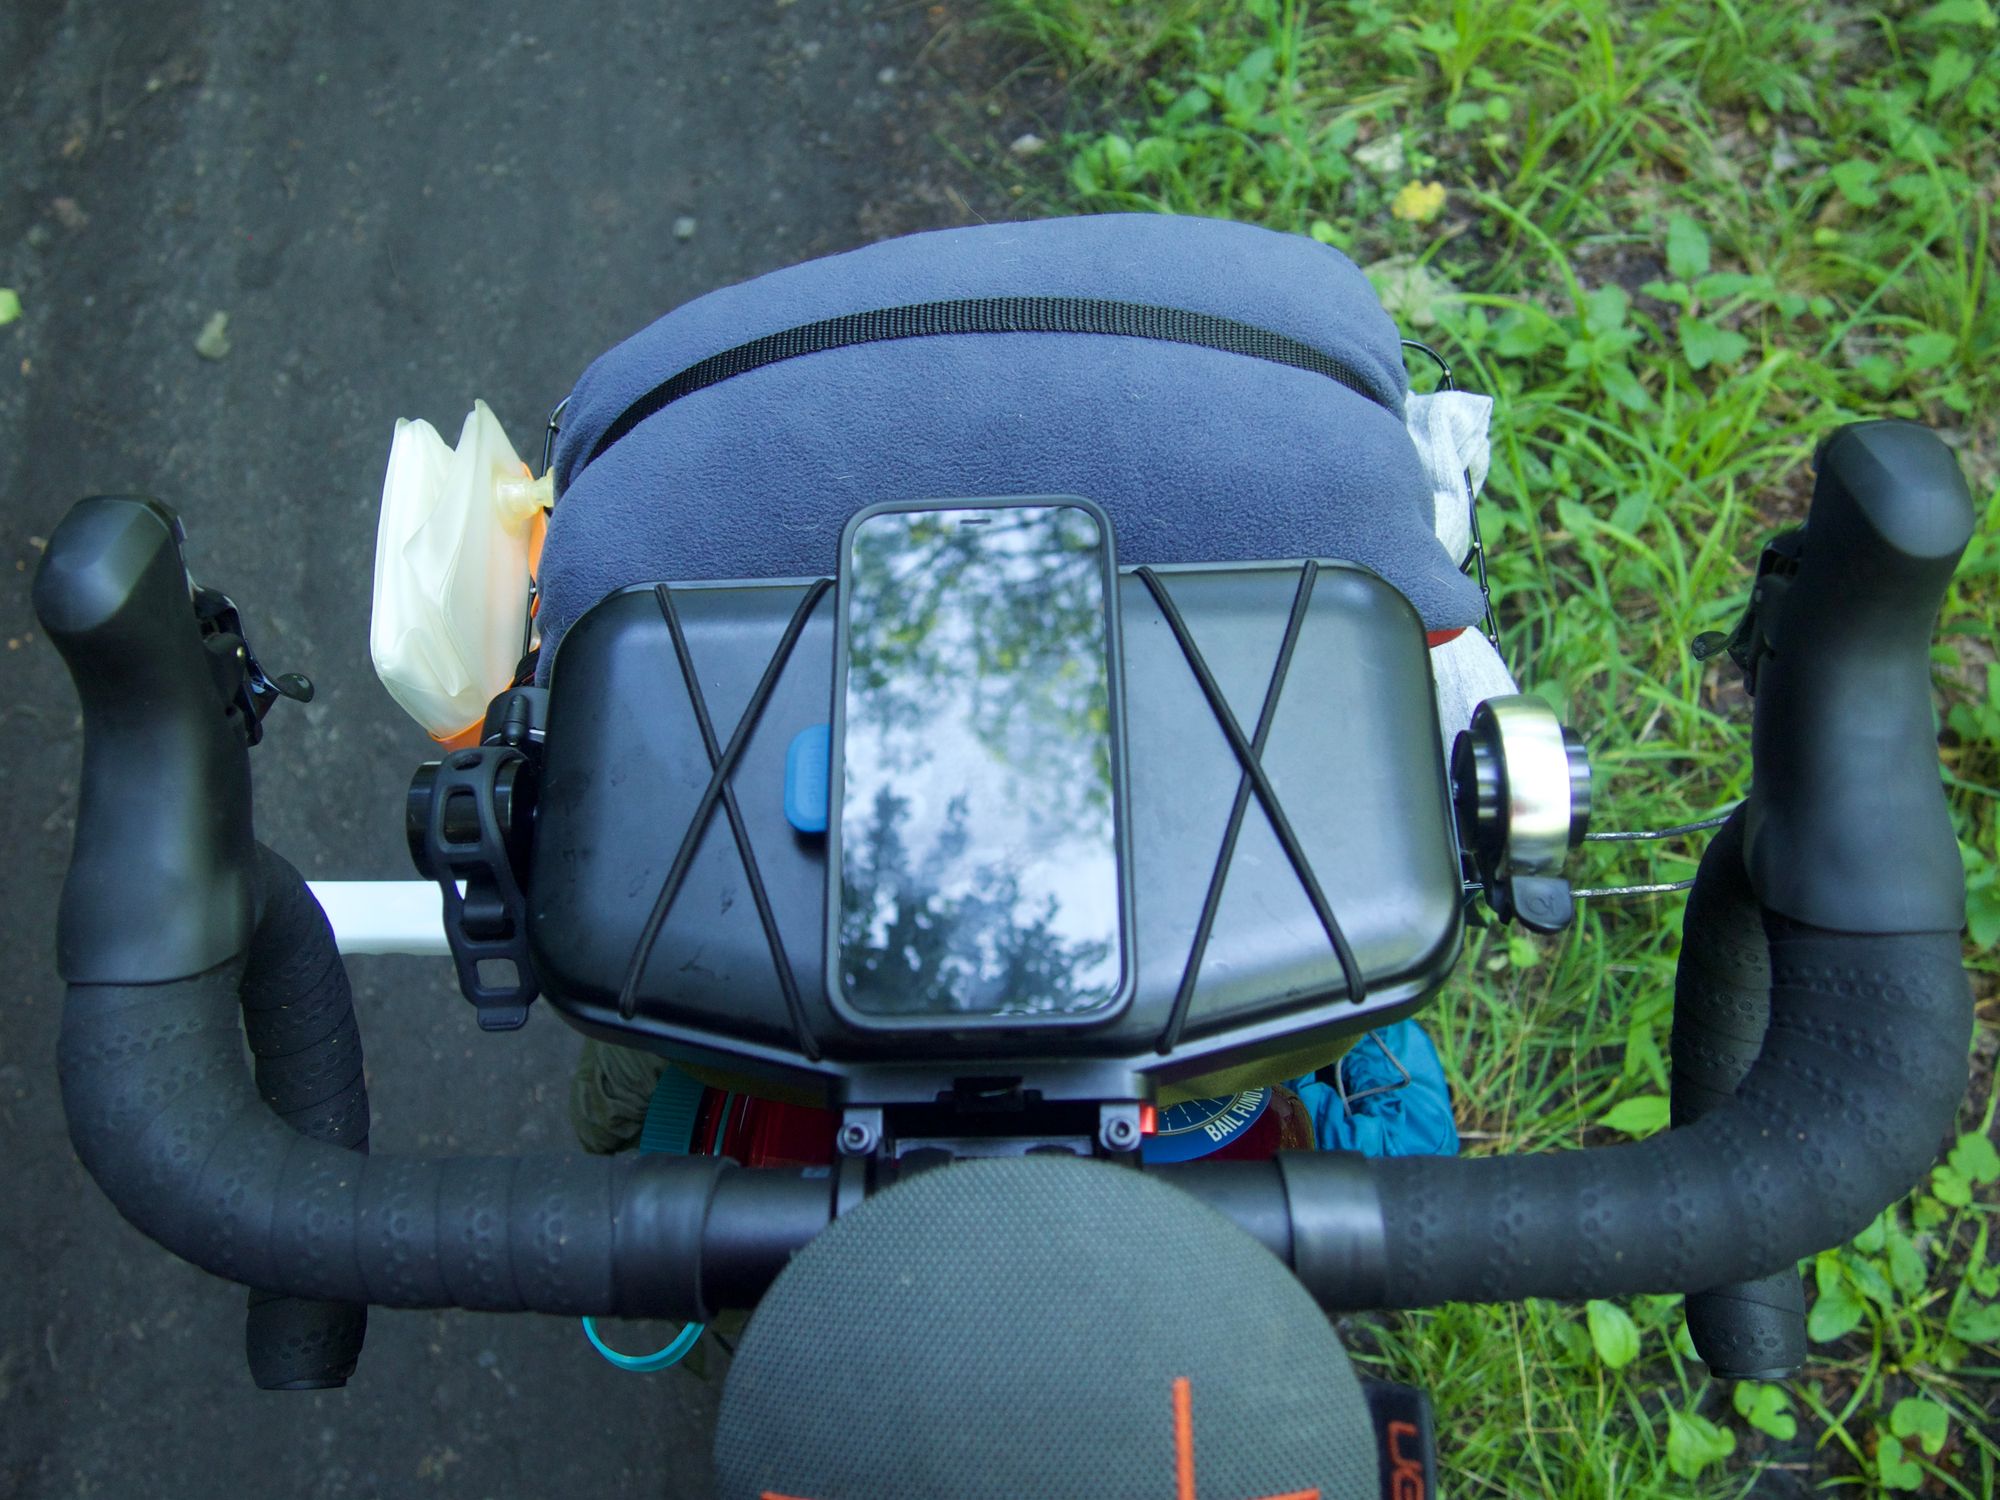 POV: handlebars. There's a phone and pillow strapped out front, along with a bluetooth speaker, bell, and headlight.